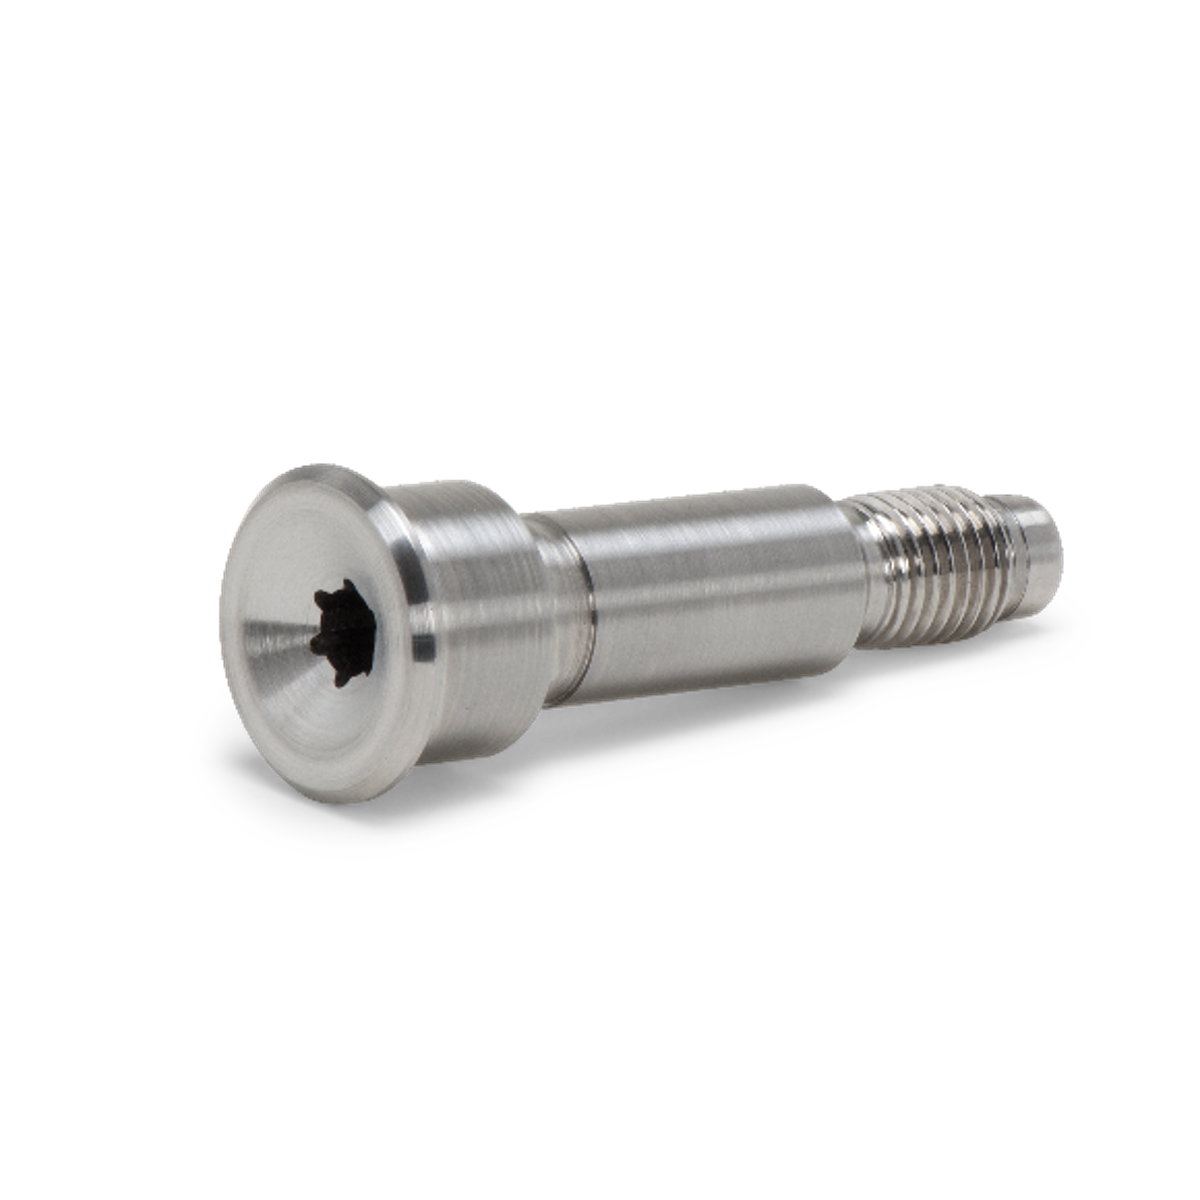 Special screws for individual requirements